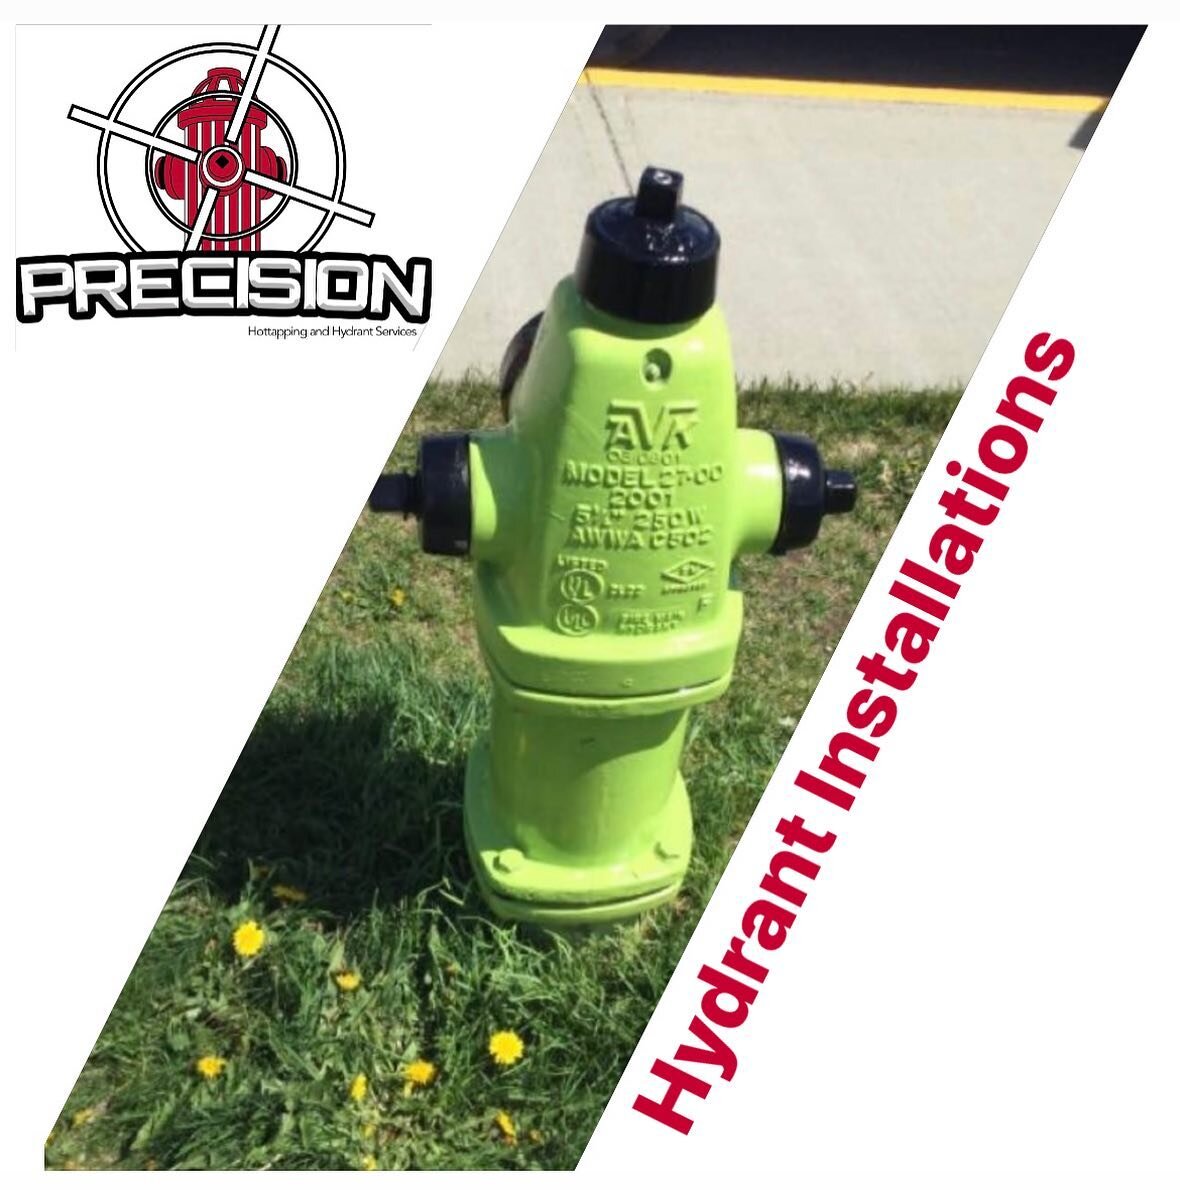 Did you know Precision does Hydrant Installations? Call us to help out on your next construction project. 

#hottapping #plumbing #construction #trucks #hydrant #fyp #yyc #alberta #f4f #work #britishcolumbia #saskatchewan